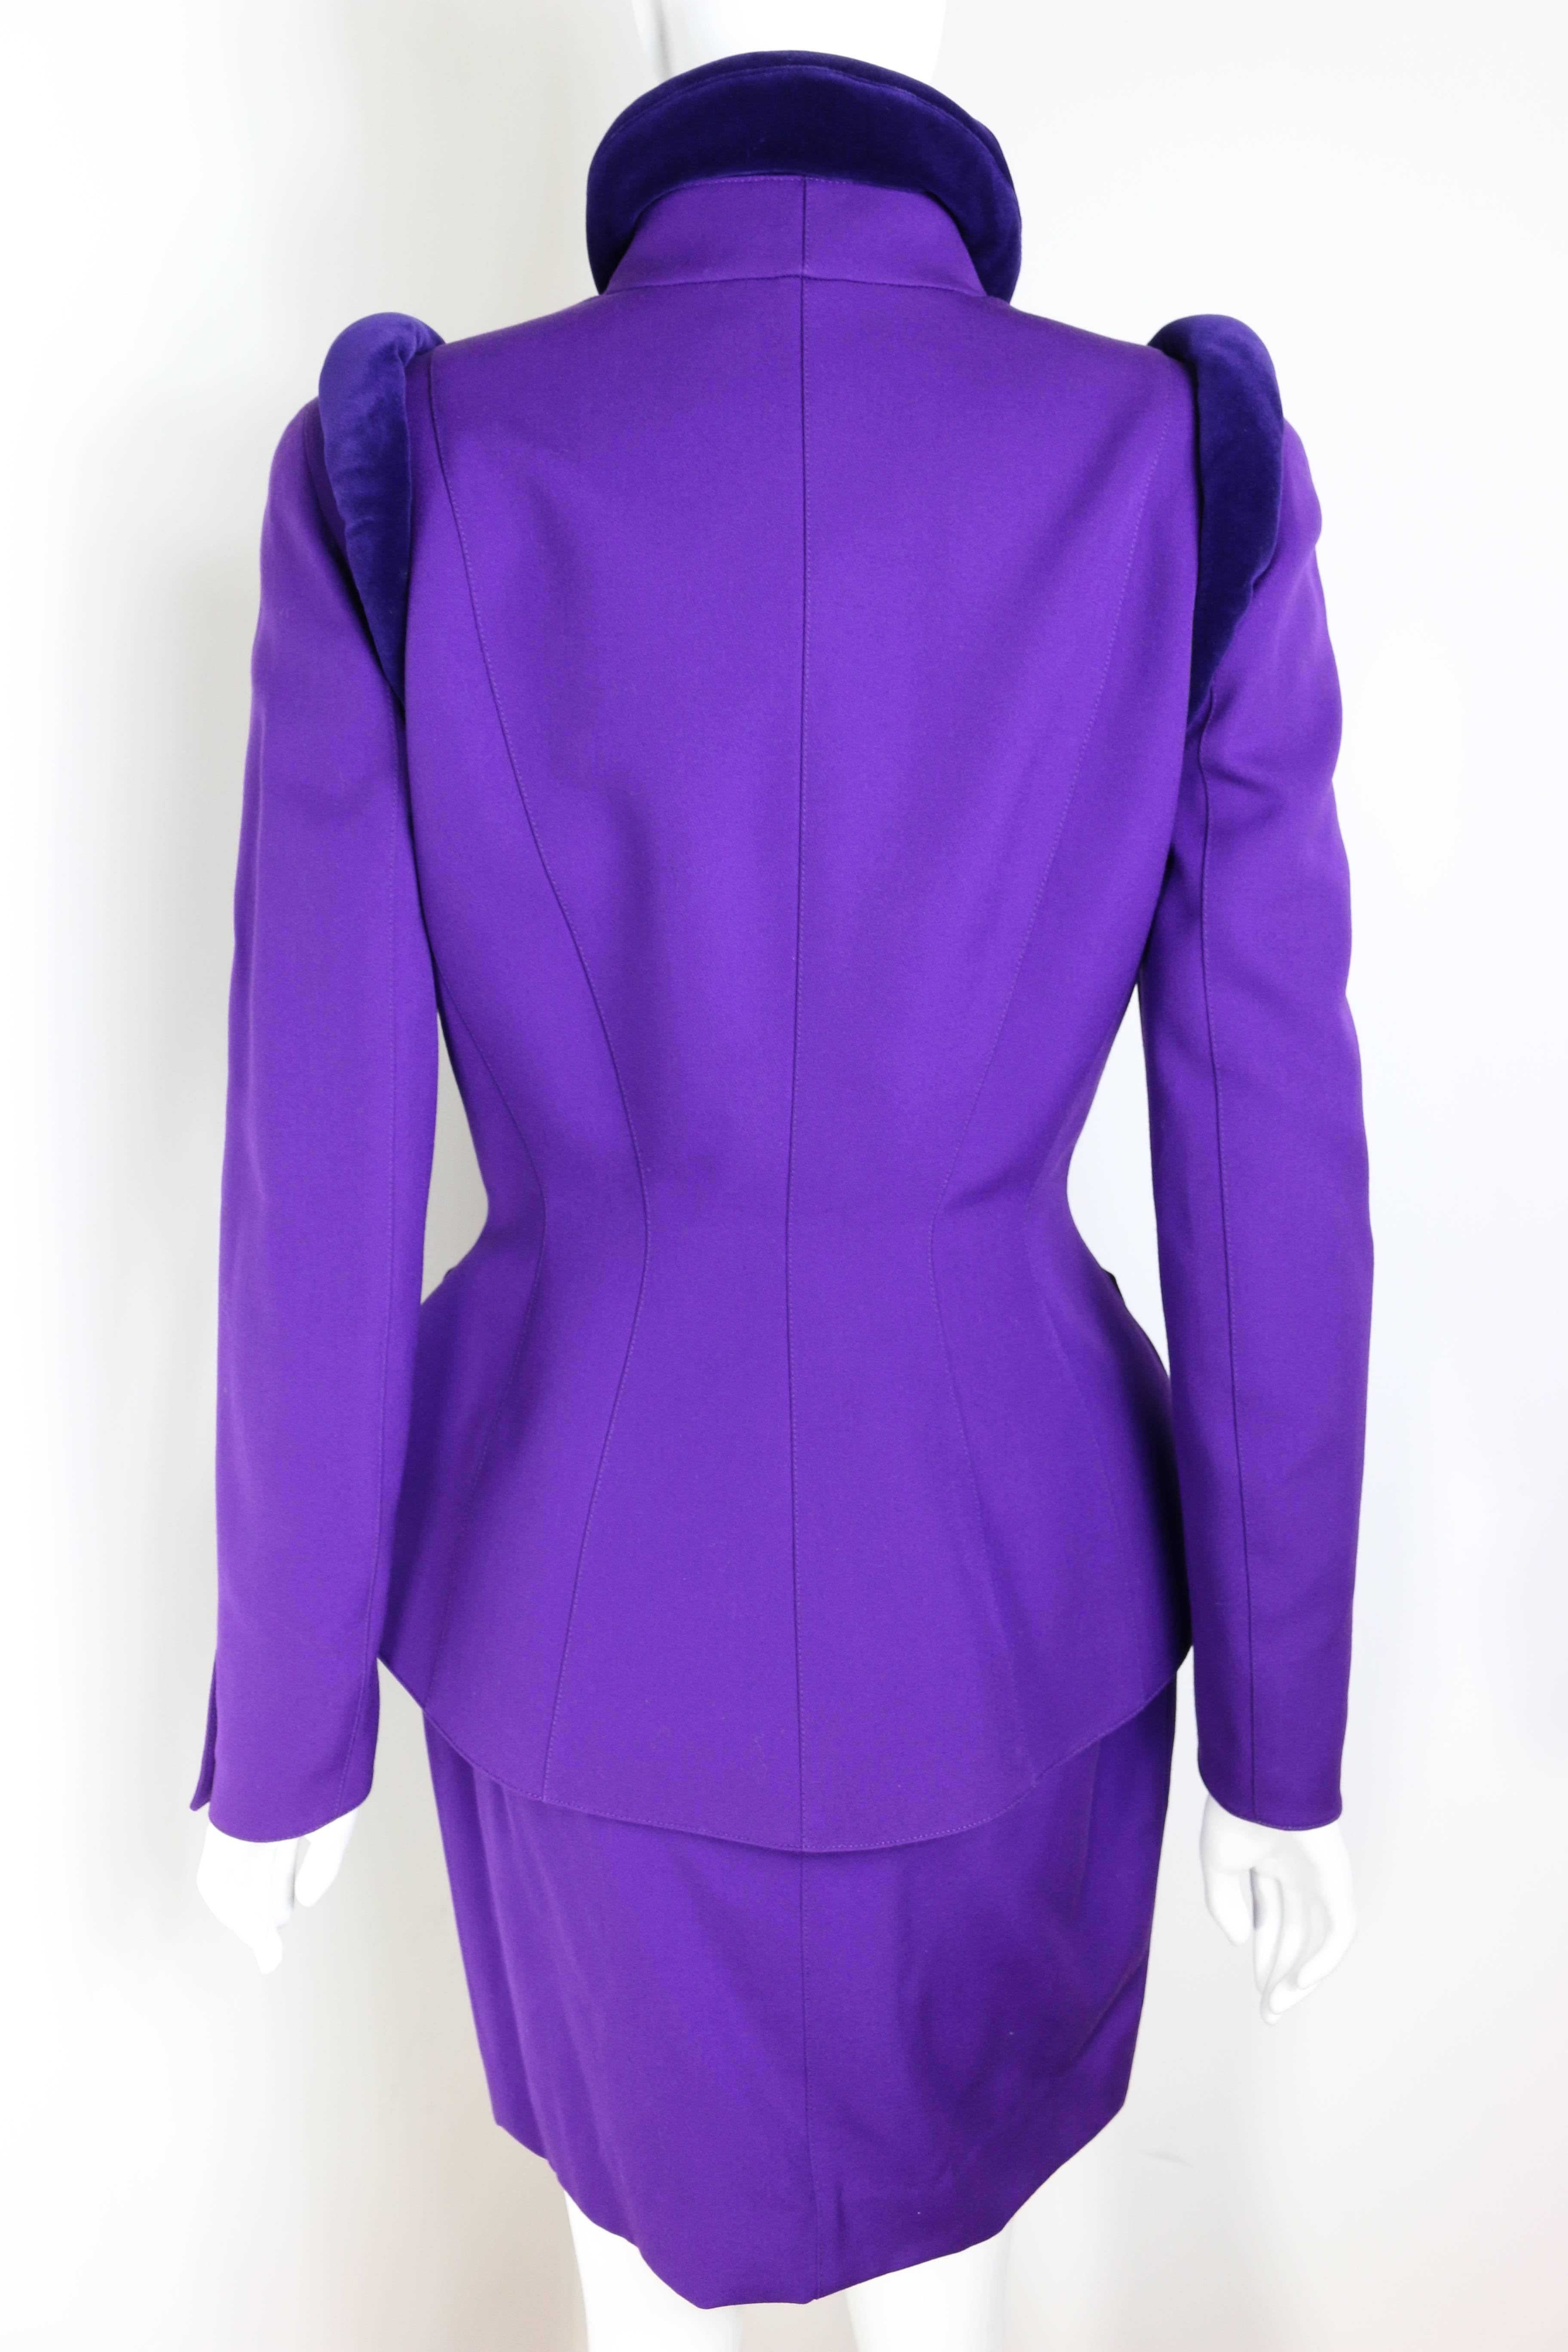 - Vintage 90s Thierry Mugler purple velvet crawl neckline and shoulder jacket and mini skirt ensemble. 

- Featuring four front snap buttons and one snap button on each cuff. 

- A very slight shoulder pads. 

- Fully lined. 

- Size 38